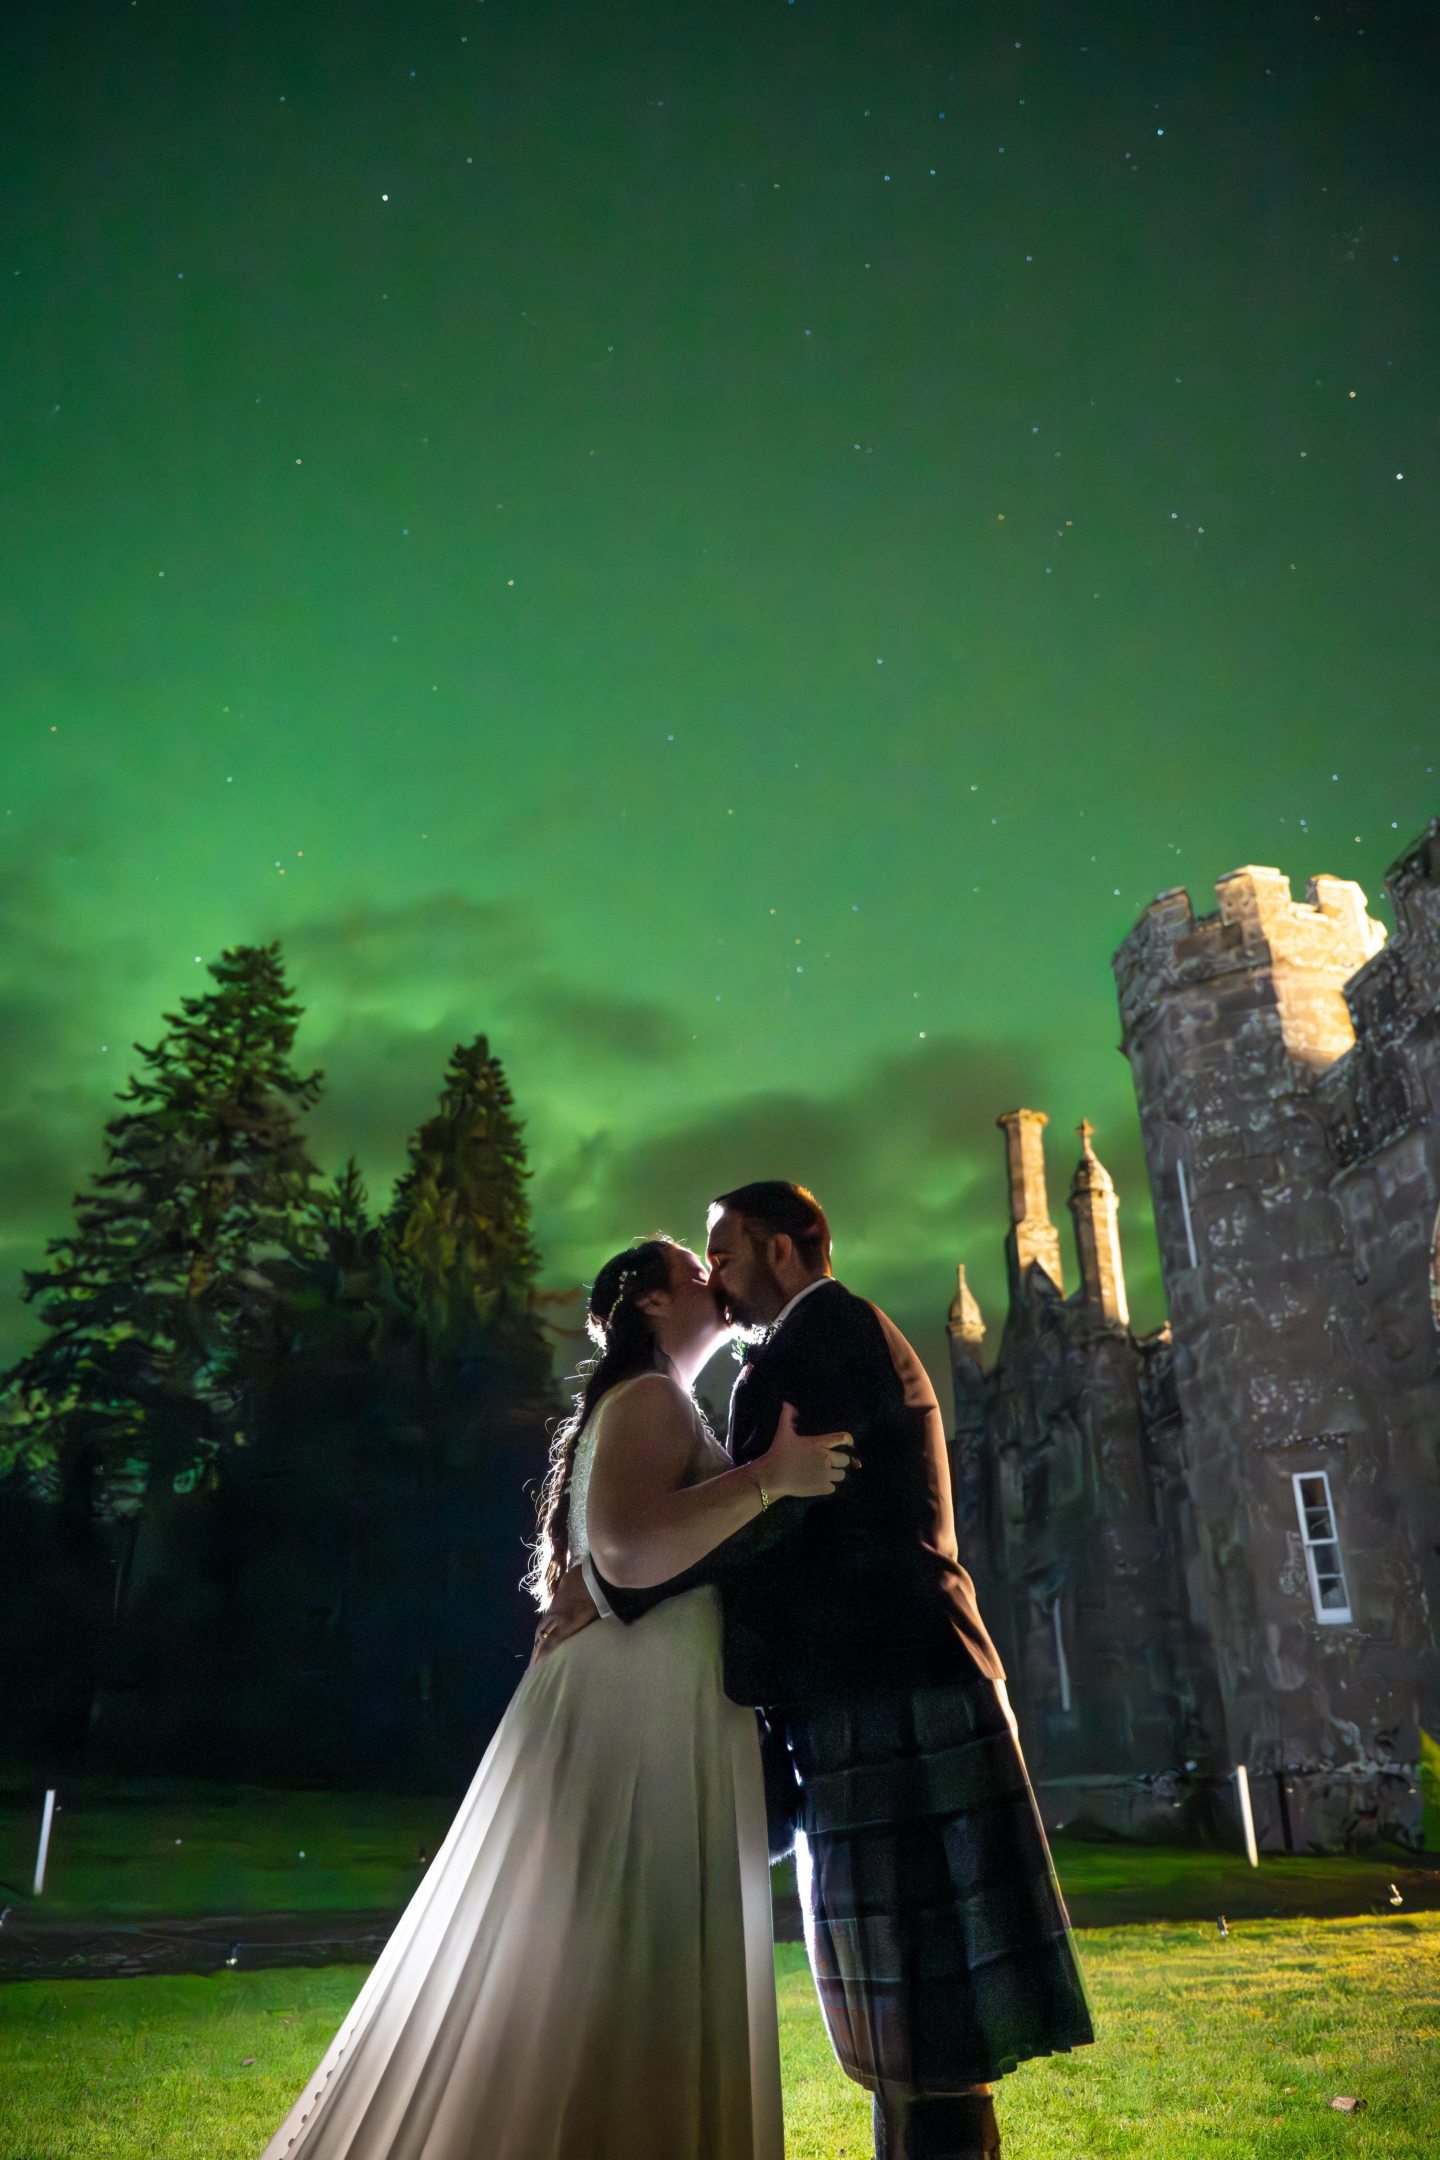 Iain Struthers' uncropped full image capturing the couple and with the Northern Lights